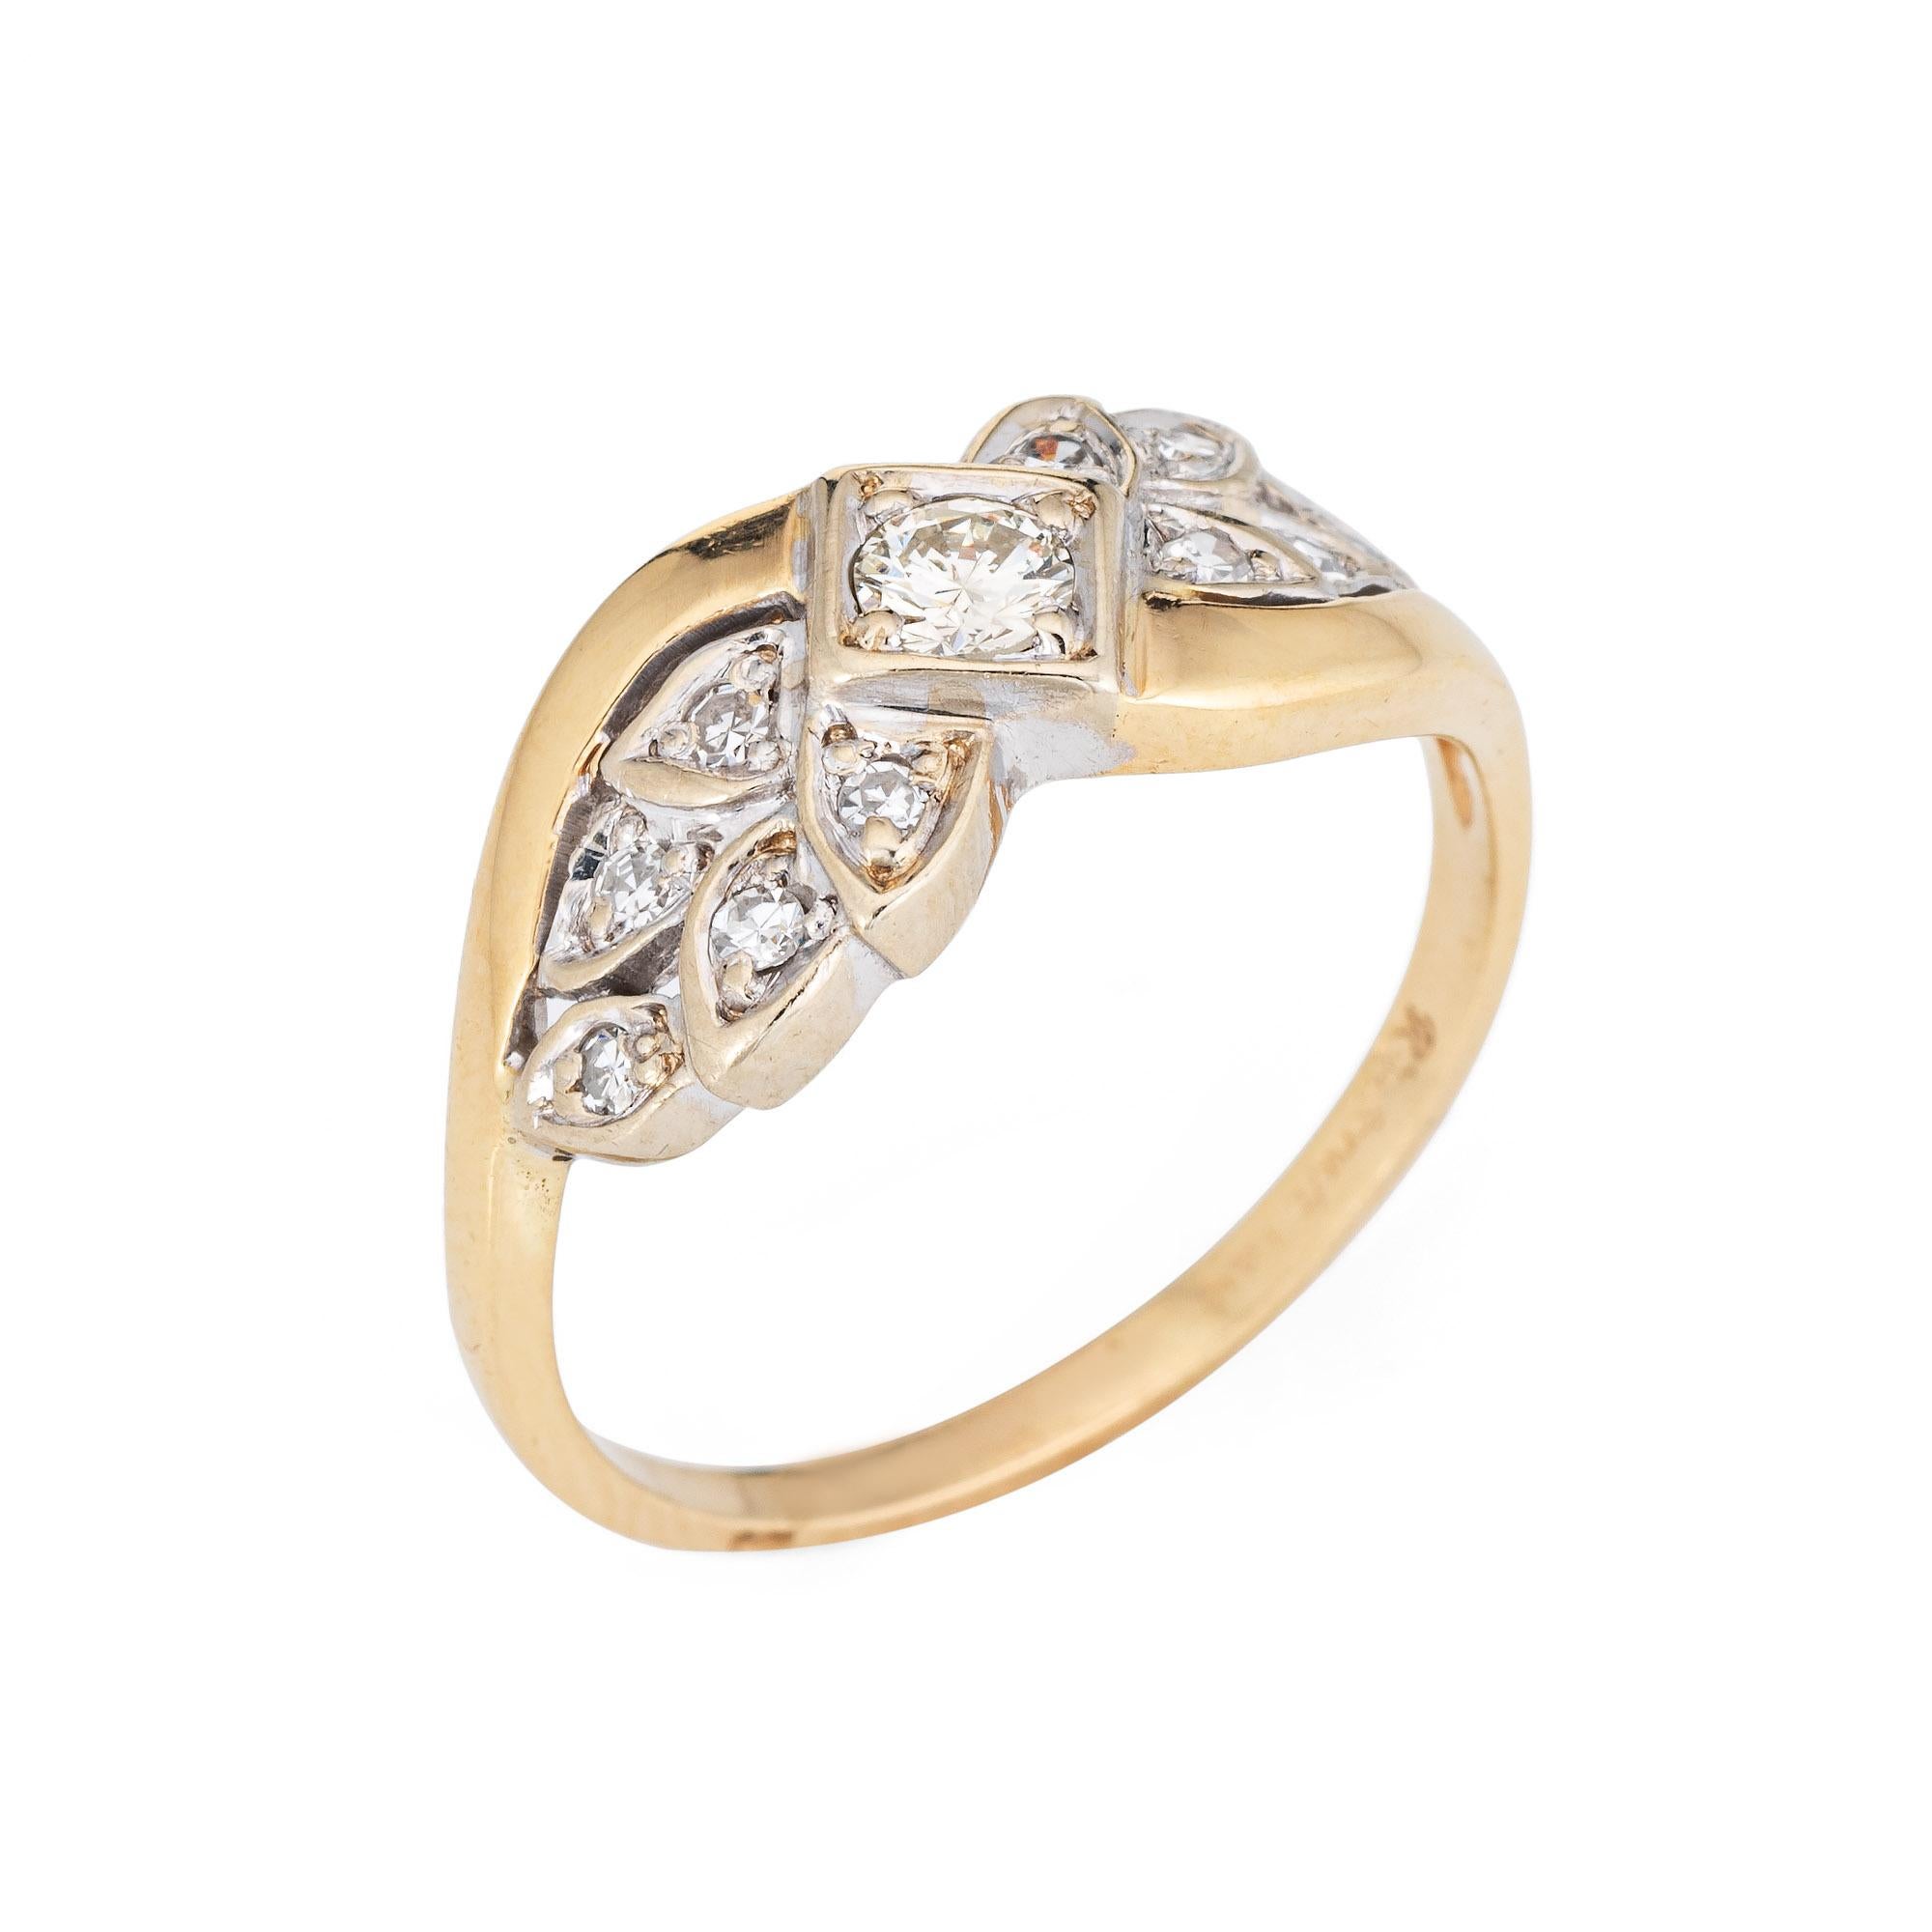 Finely detailed vintage diamond wreath ring (circa 1940s to 1950s) crafted in 14k yellow & white gold. 

Centrally mounted round brilliant cut diamond is estimated at 0.10 carats, accented with 10 estimated 0.01 carat single cut diamonds. The total